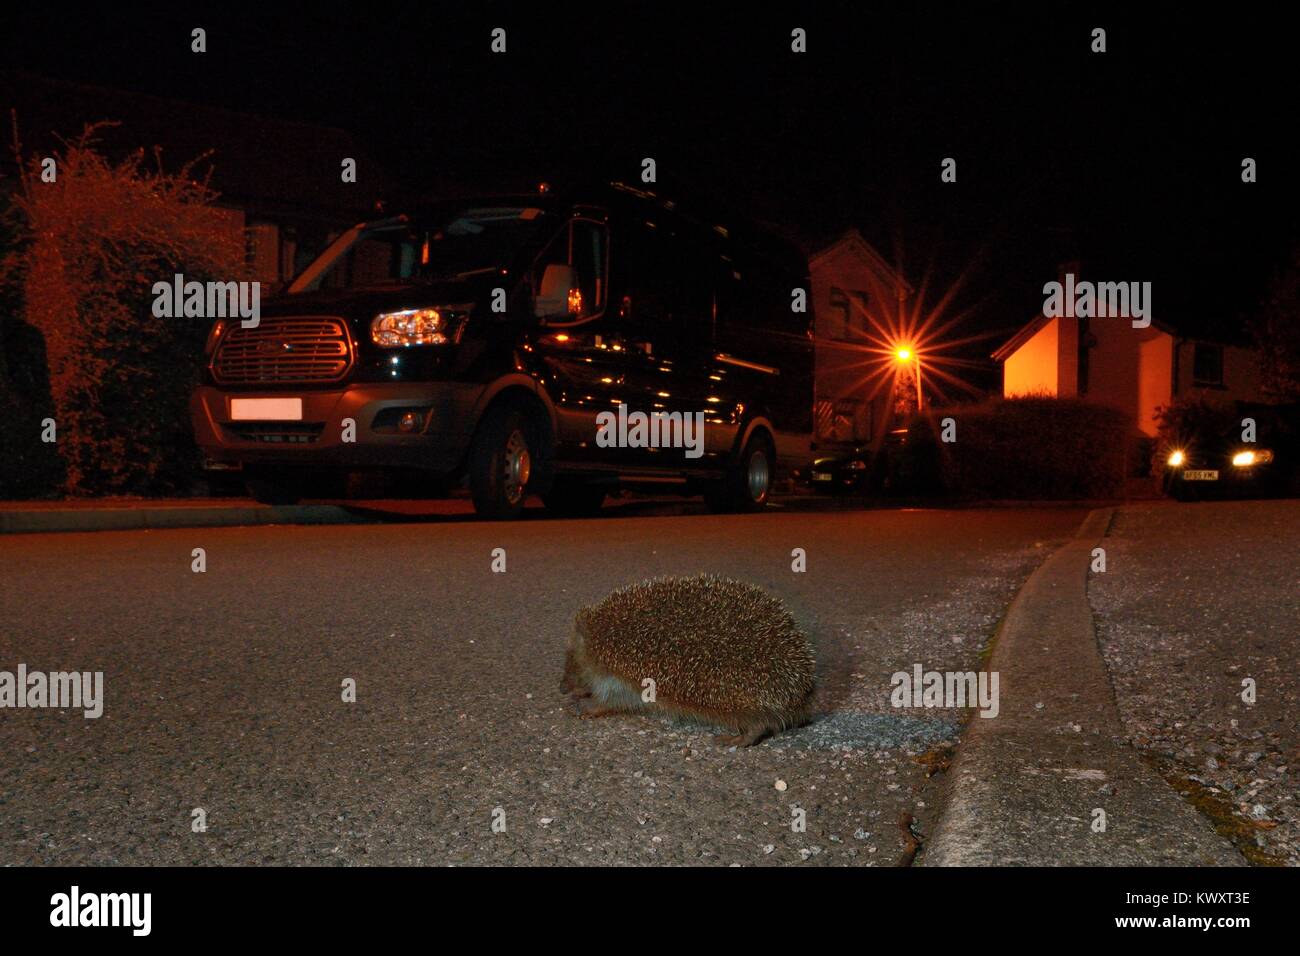 Hedgehog (Erinaceus europaeus) crossing a suburban street at night to forage in gardens, Chippenham, Wiltshire, UK.  Taken with a remote camera. Stock Photo